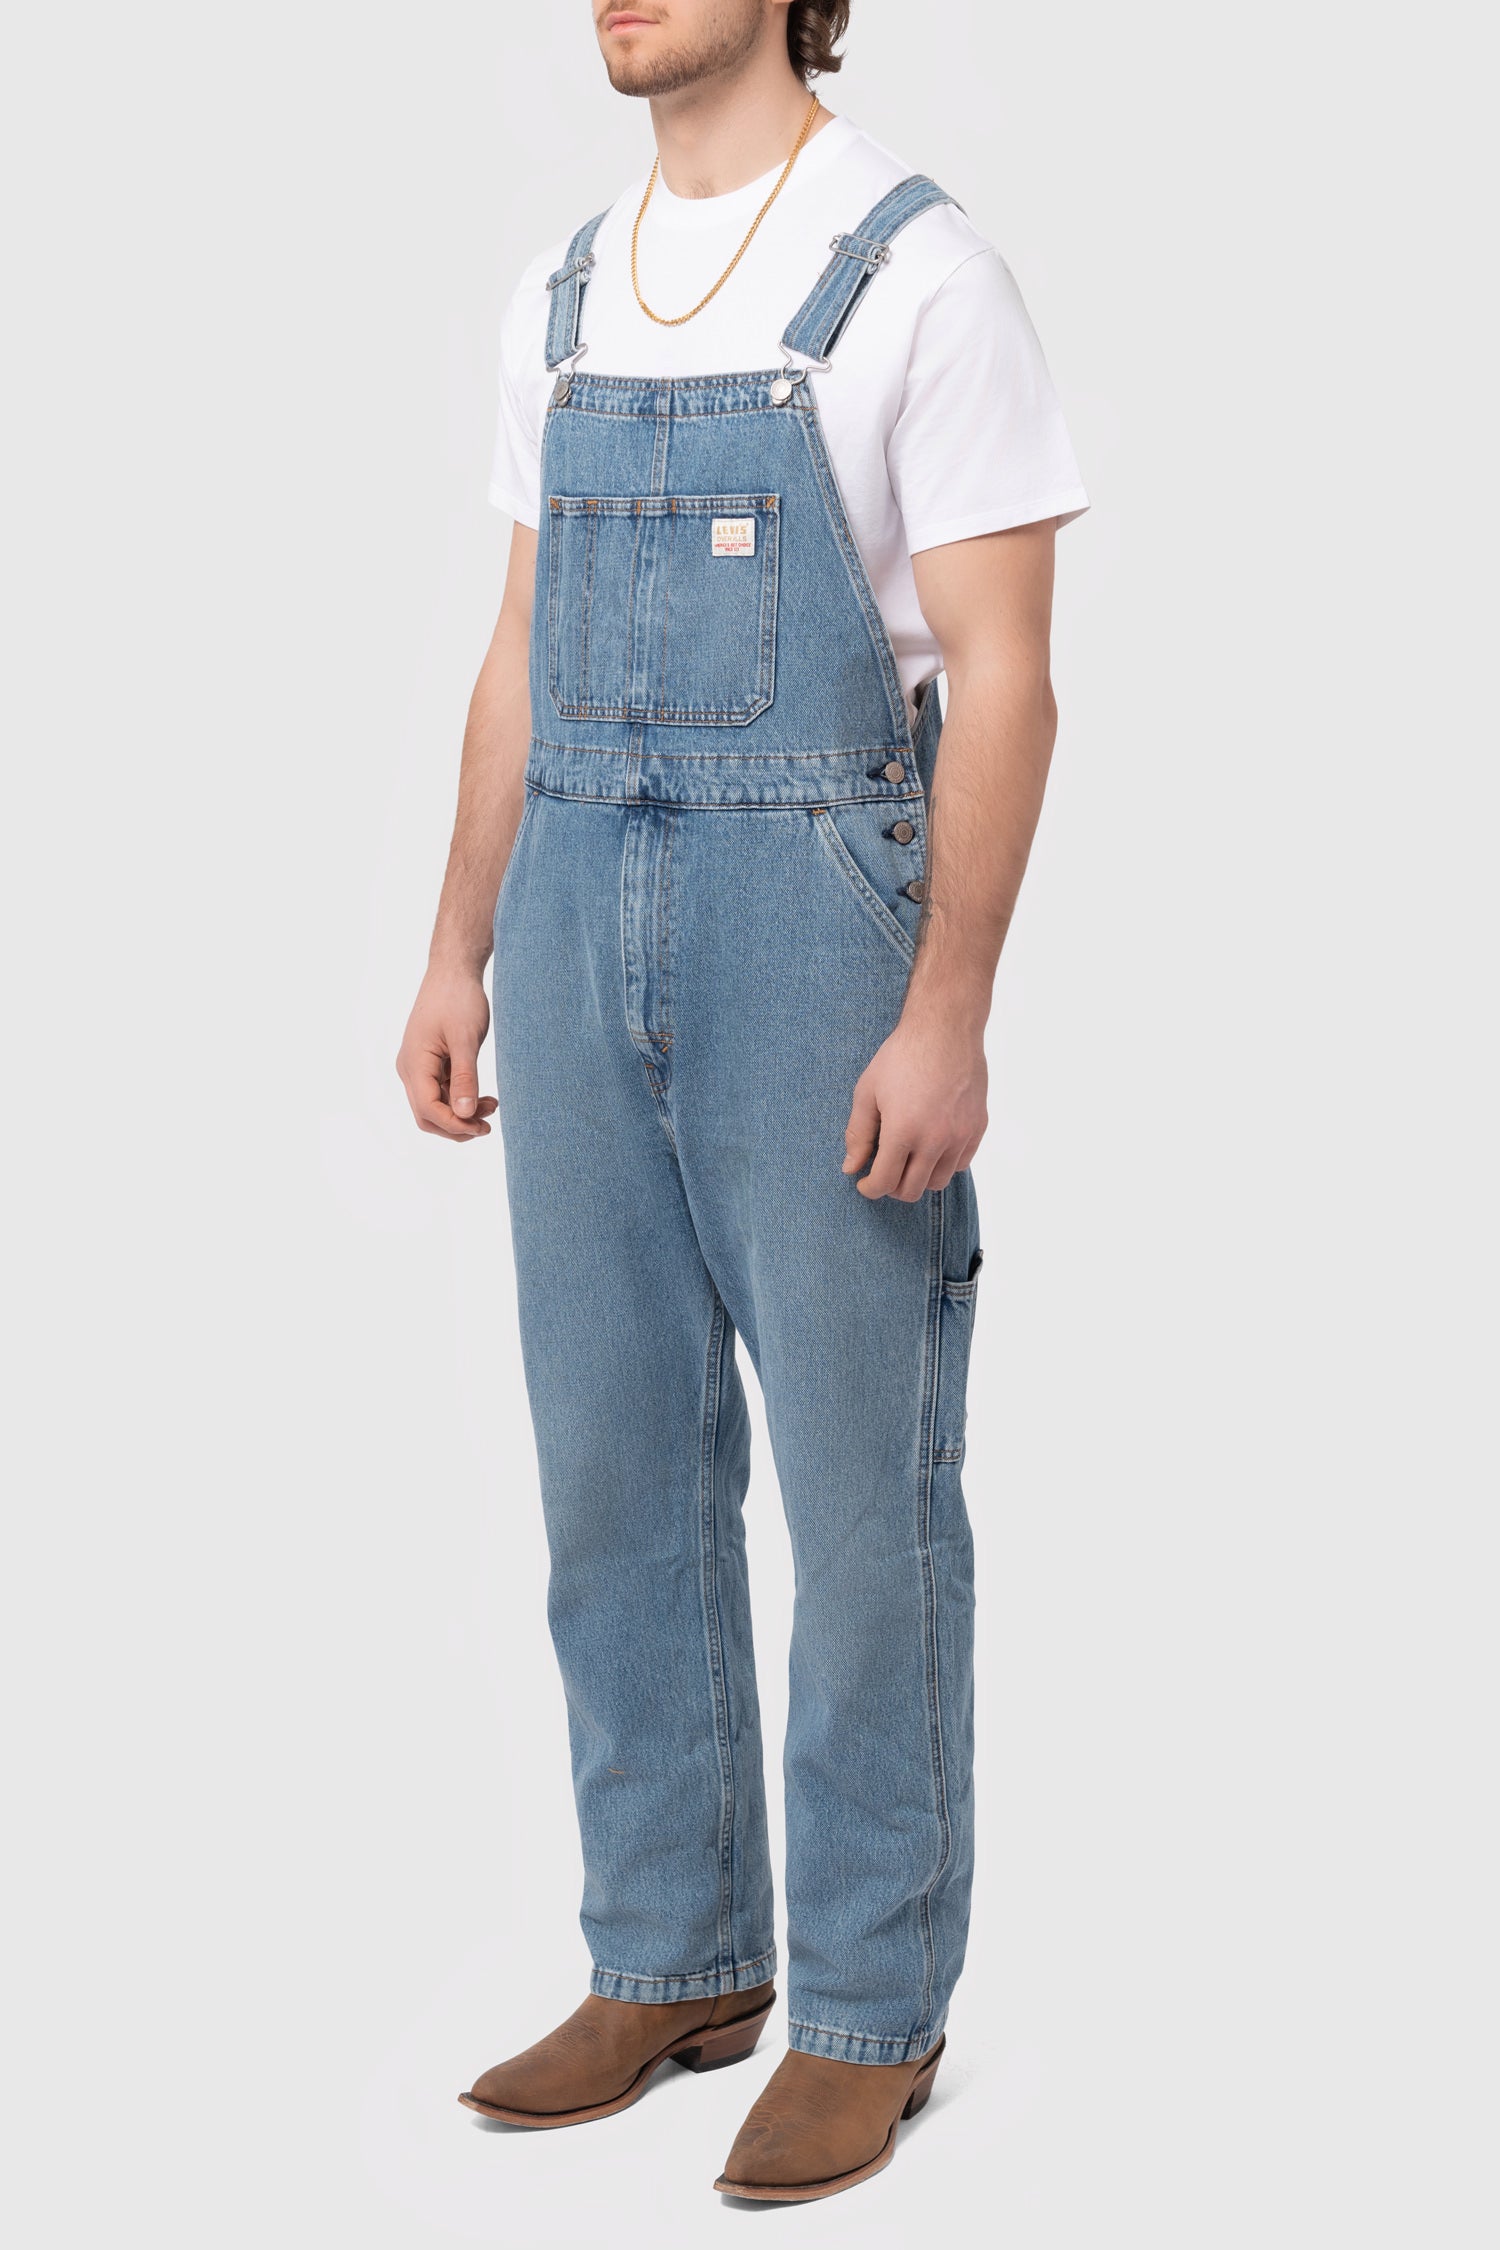 Men's Levi's Overall in Blue Moon